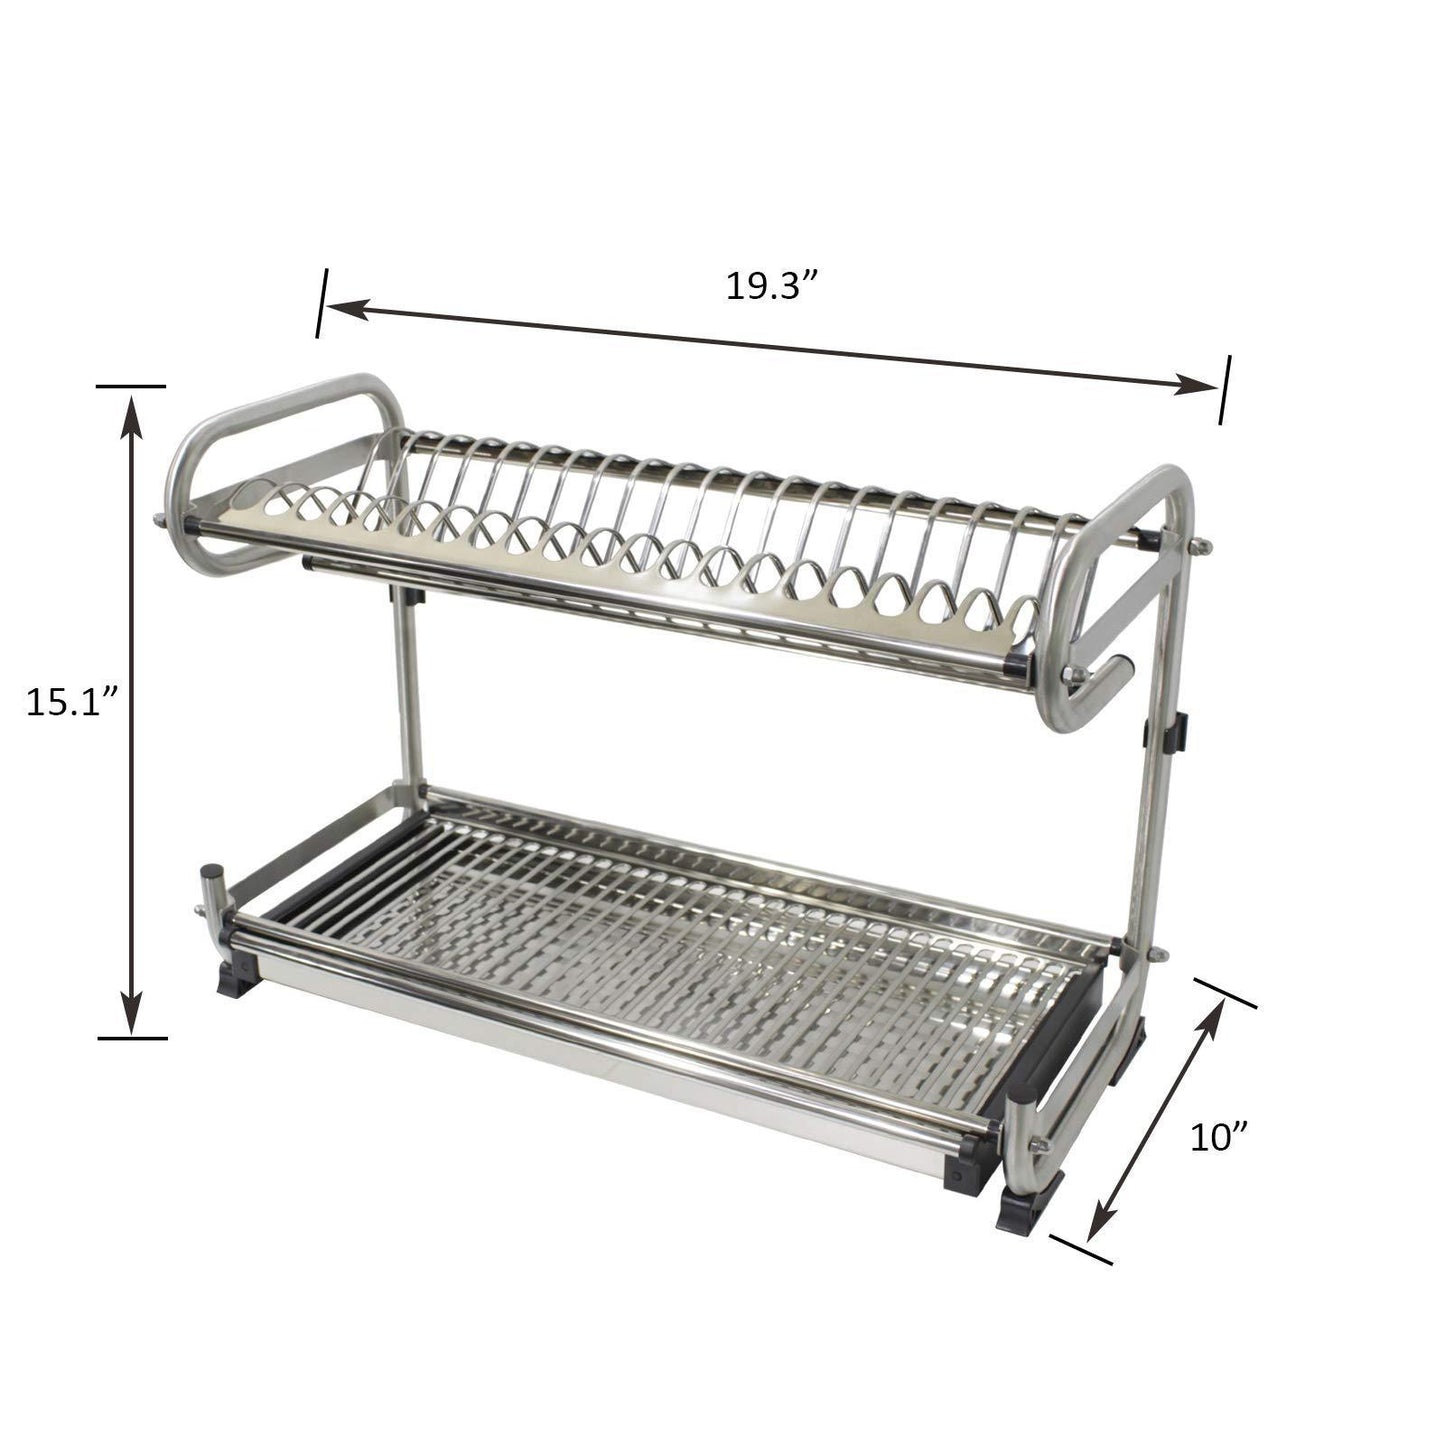 Organize with 2 tier kitchen cabinet dish rack 19 3 wall mounted stainless steel dish rack steel dishes drying rack plates organizer rubber leg protector with drain board